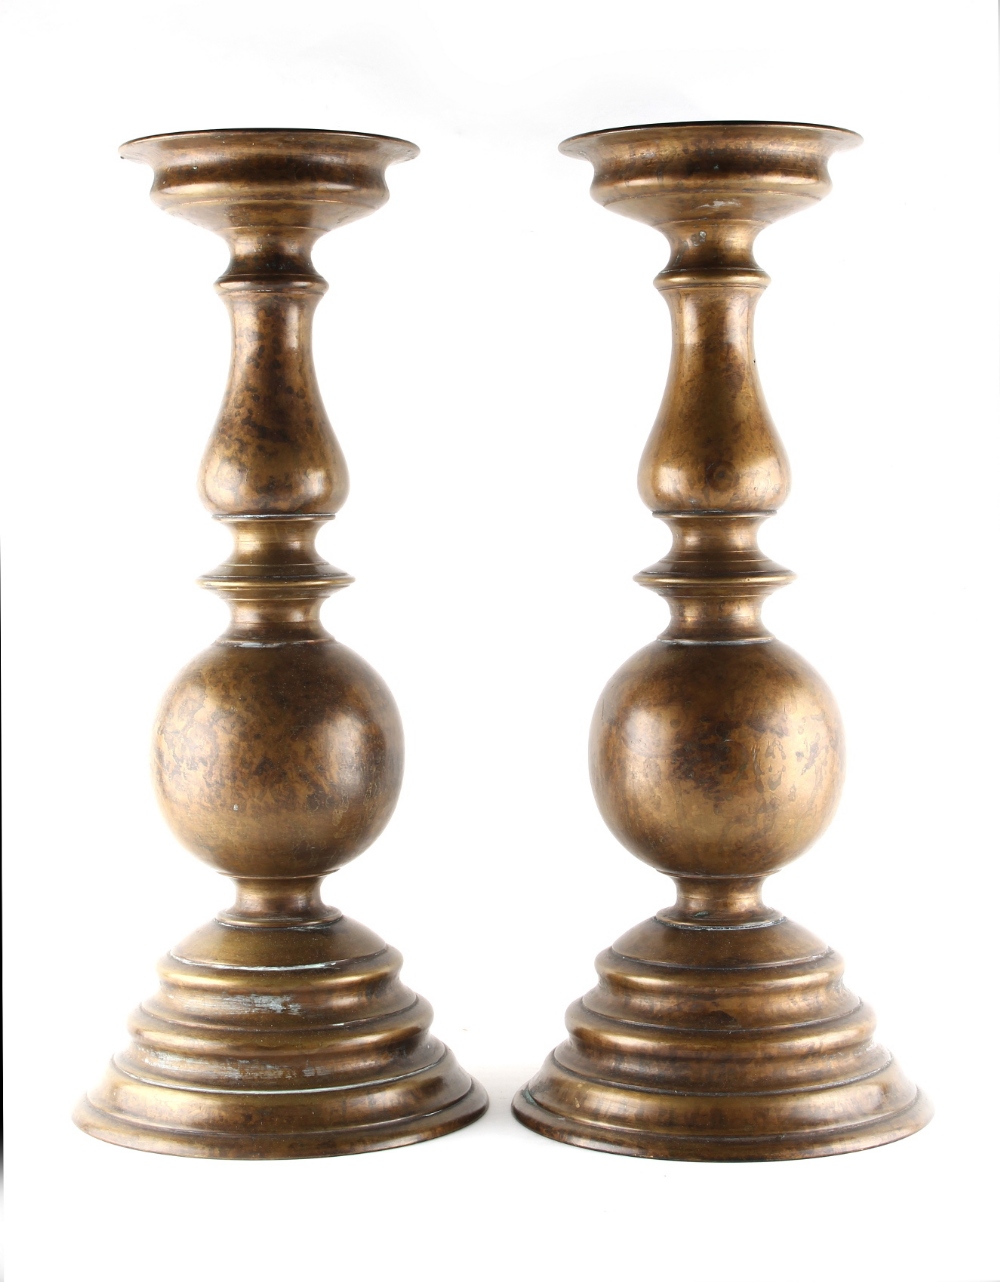 Property of a gentleman - a pair of patinated bronze pricket baluster candlesticks,19.5ins. (49.